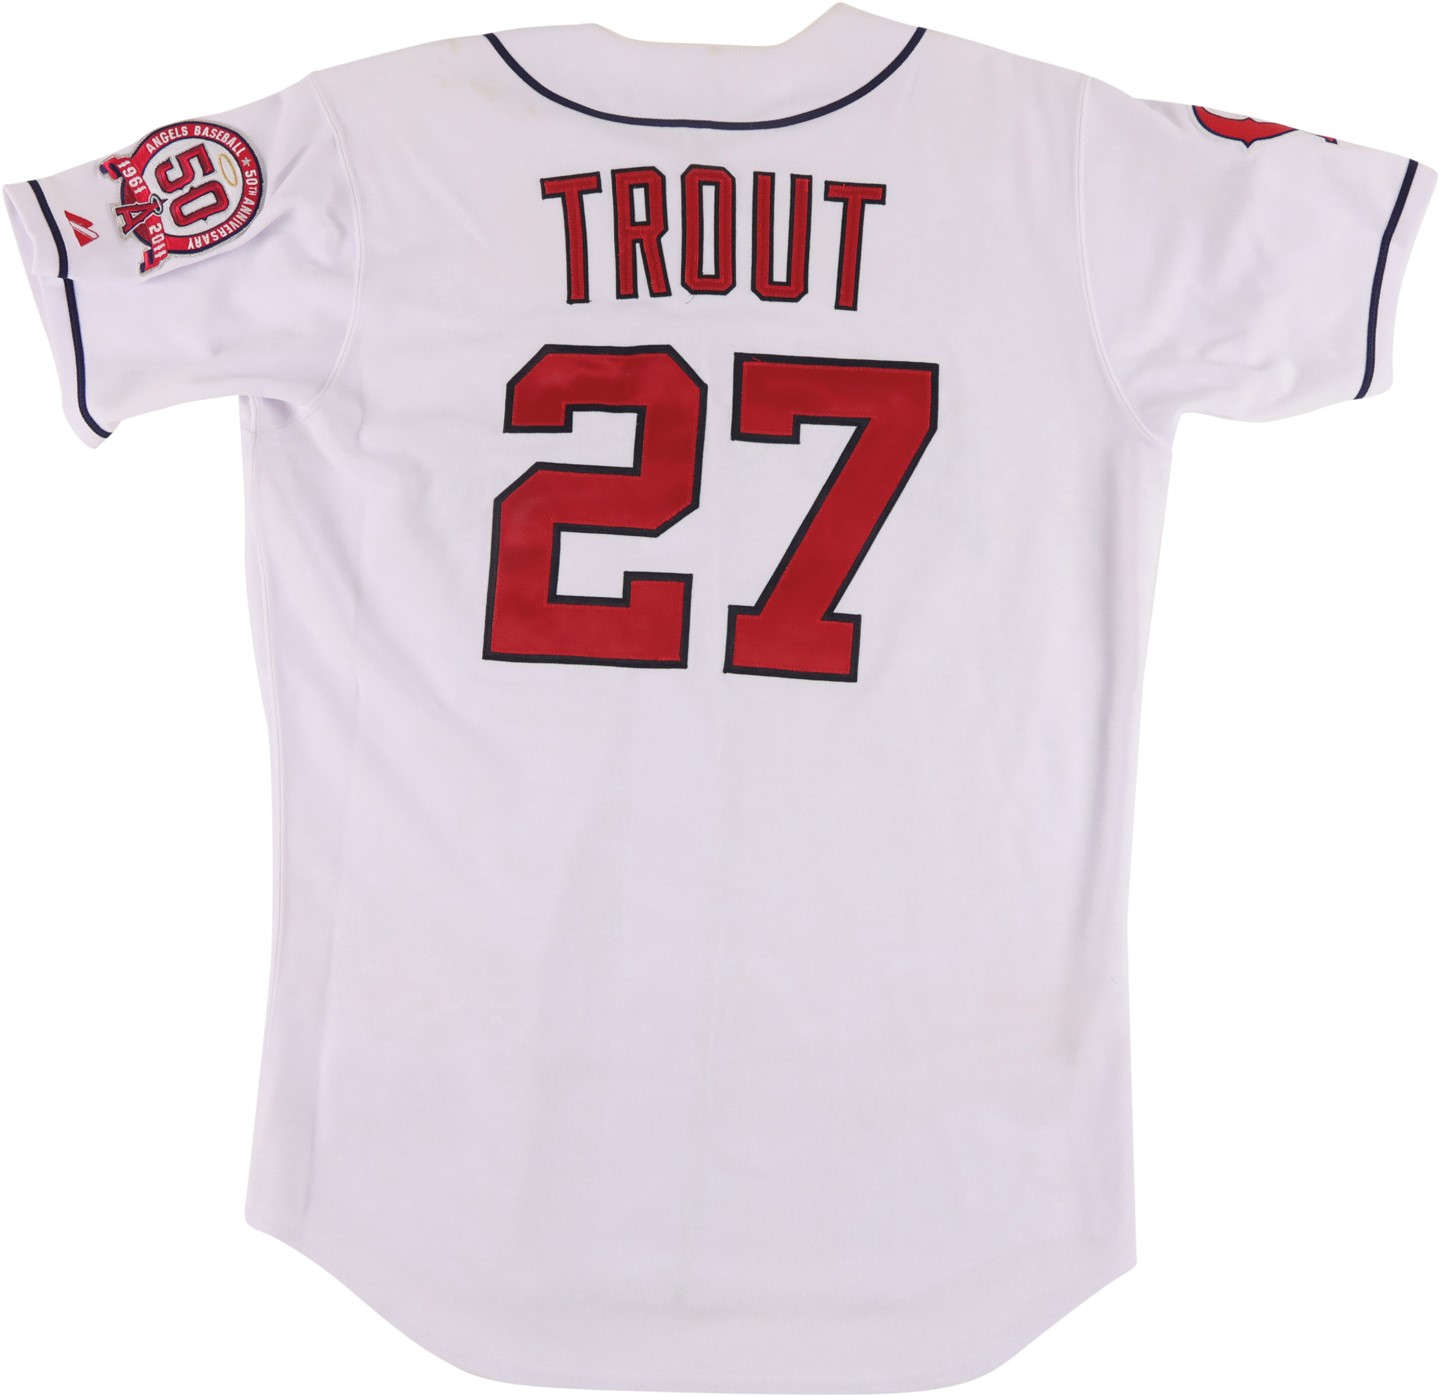 Mike Trout Game Used Jersey: 2 Home Runs